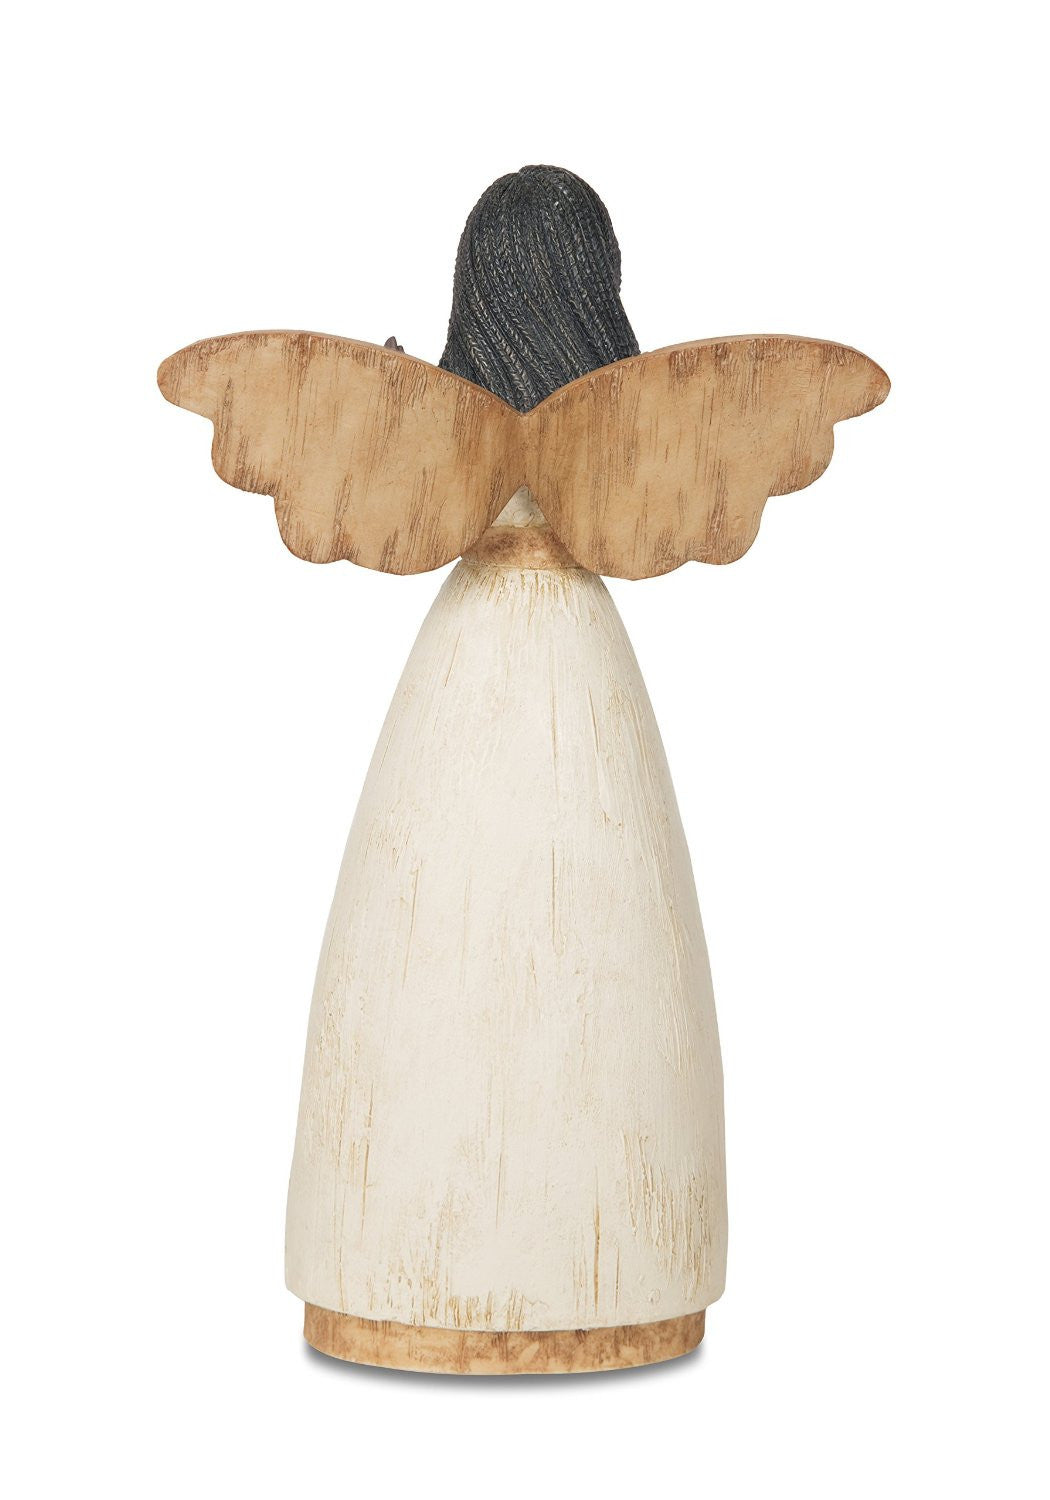 2 of 2: African American Mother Angel Figurine with Hearts: Simple Spirits Collection by Pavilion Gifts